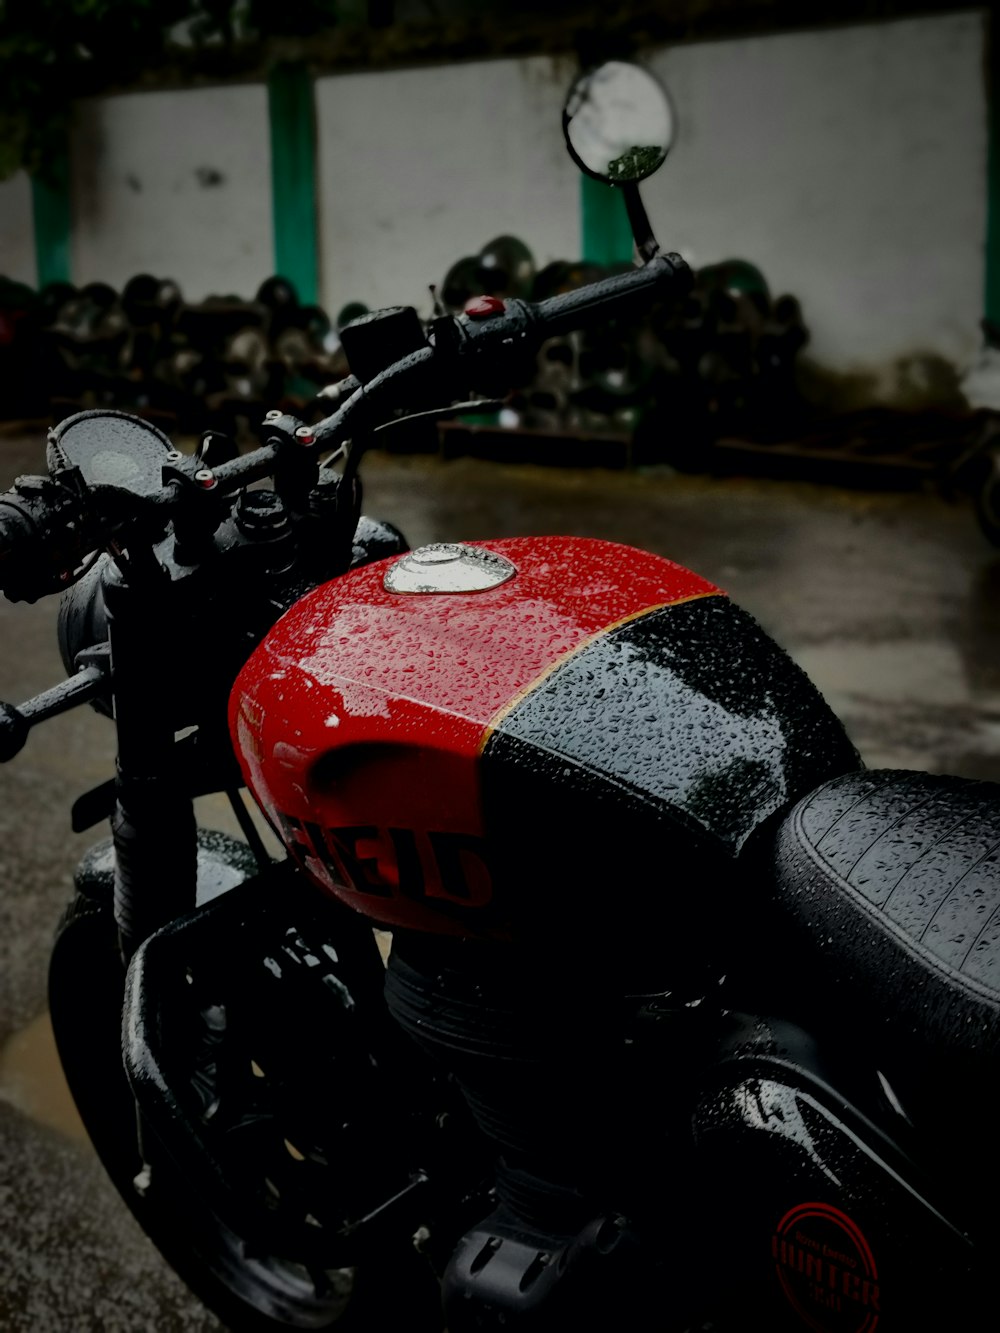 a red and black motorcycle parked in a parking lot